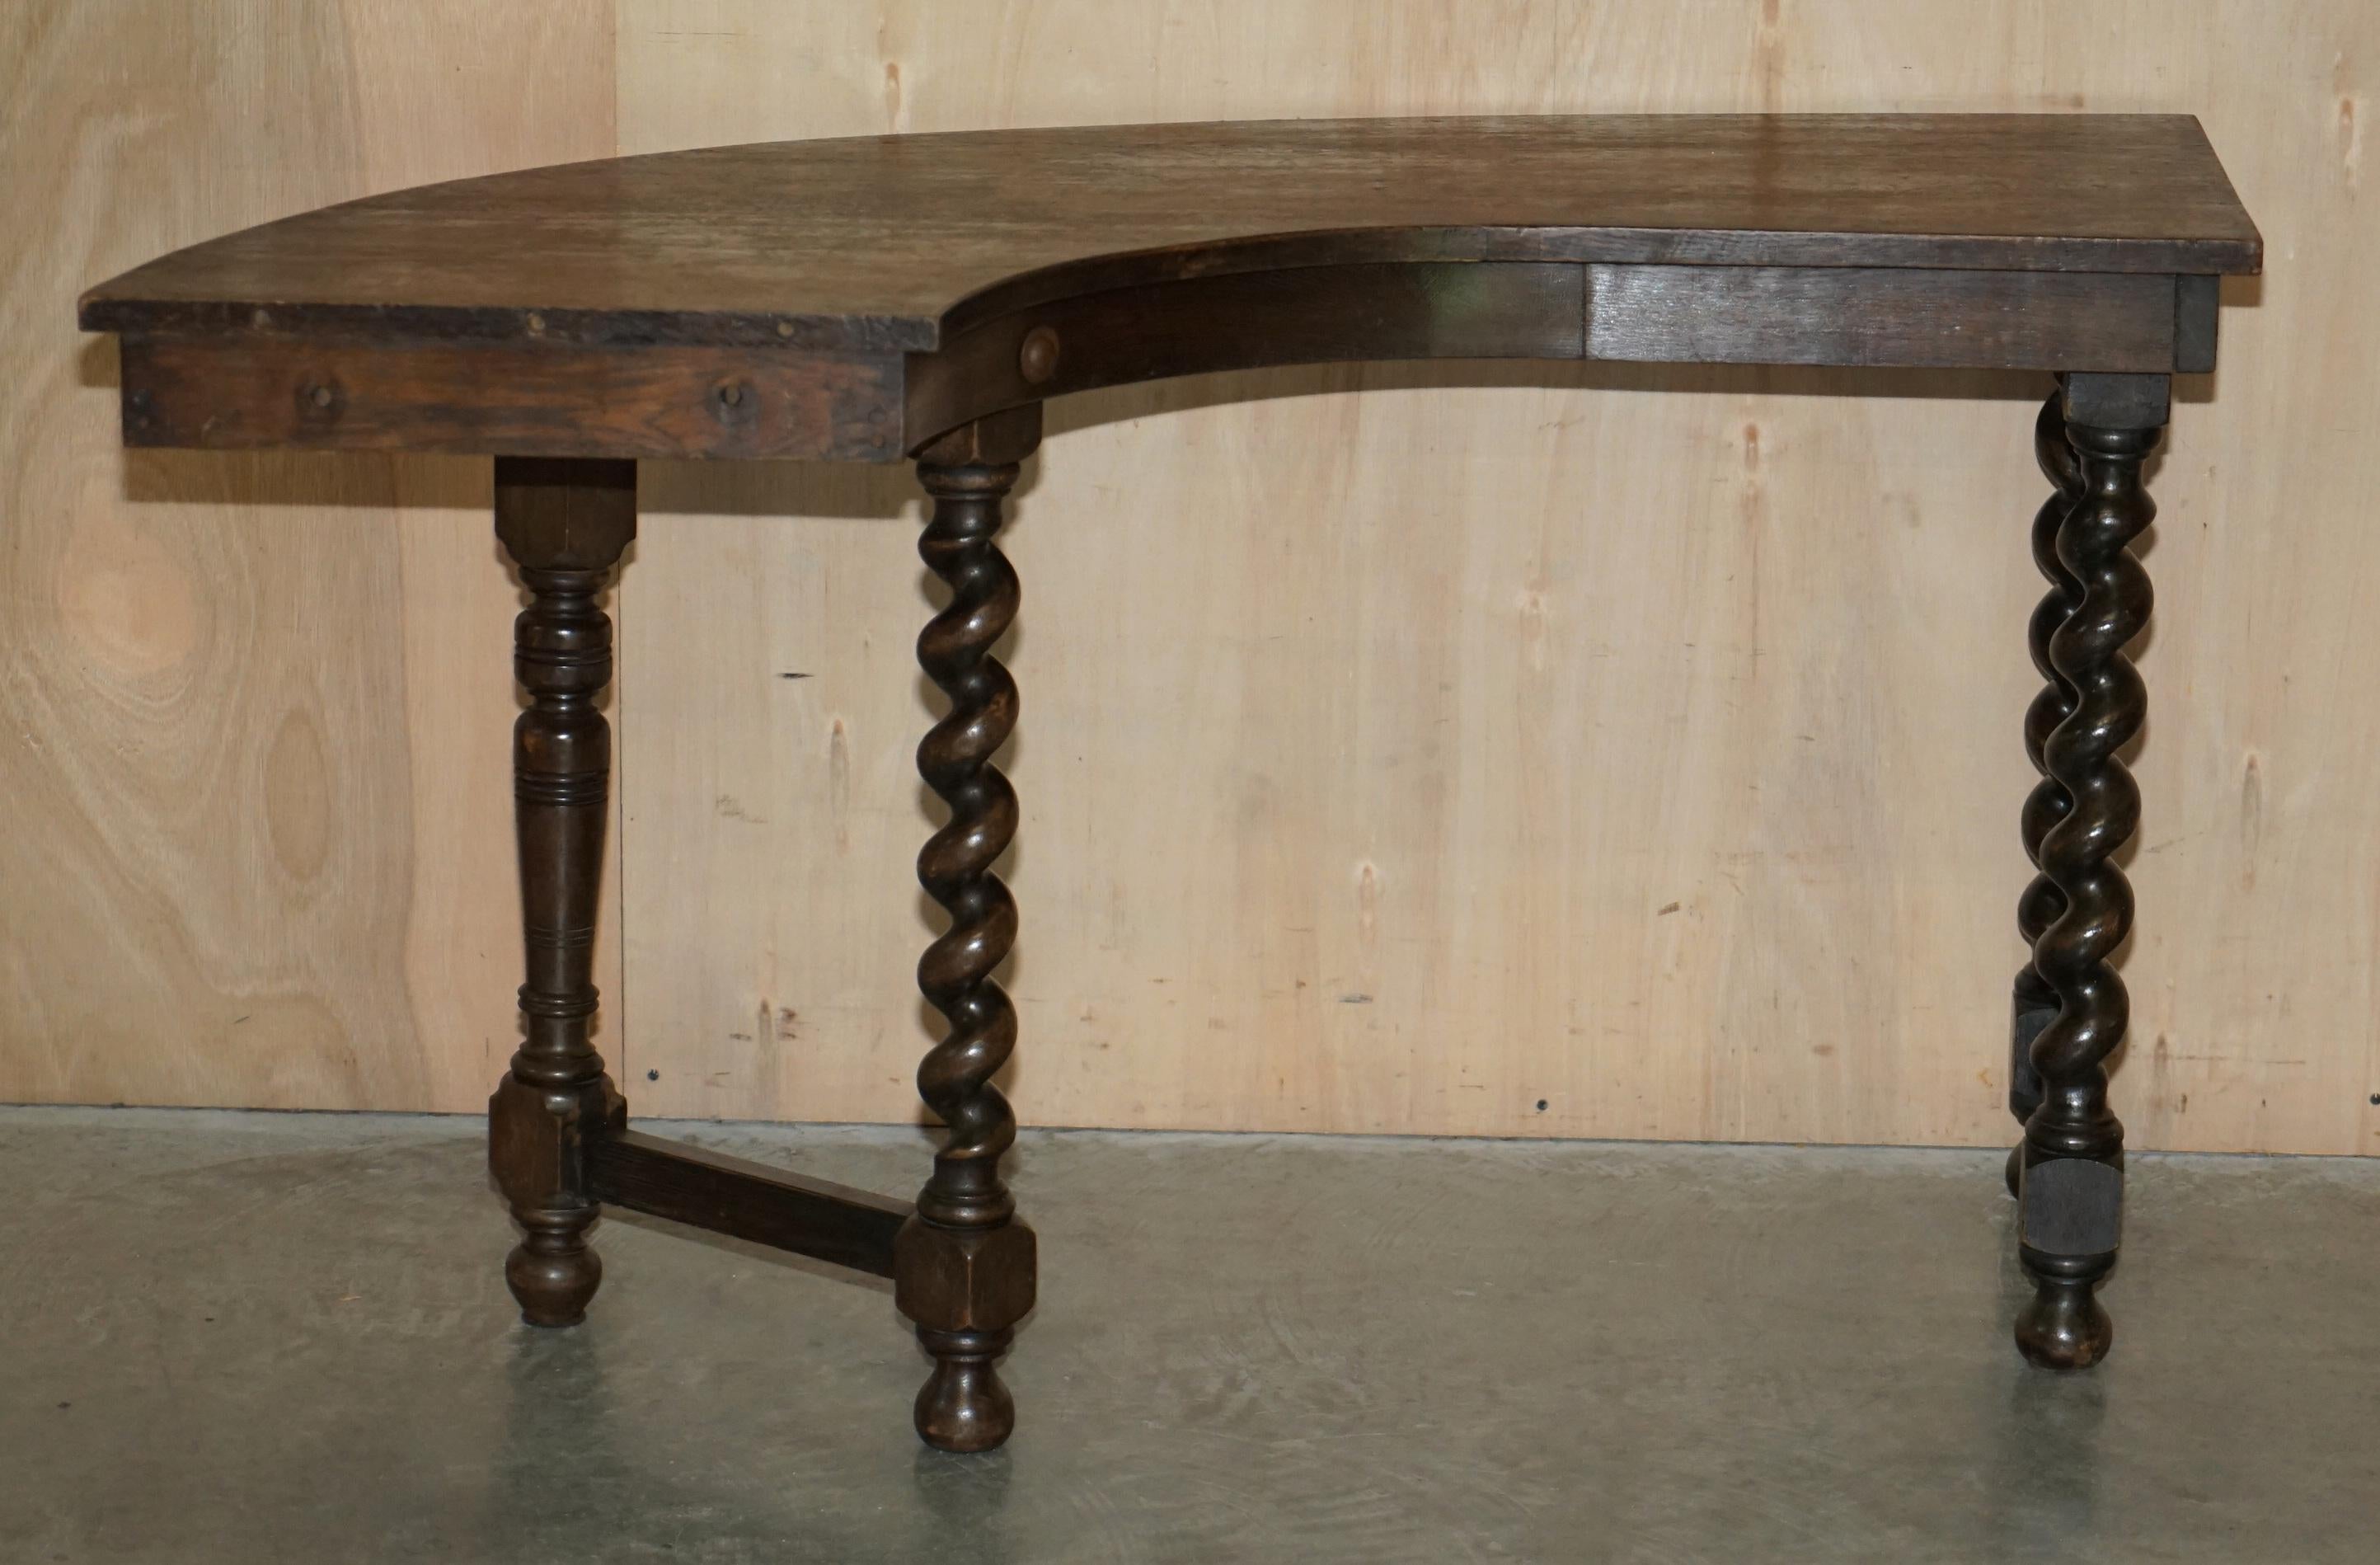 RARE & COLLECTABLE ANTIQUE JACOBEAN REVIVAL BARLEY TWiST LEG ENGLISH HUNT TABLE For Sale 10